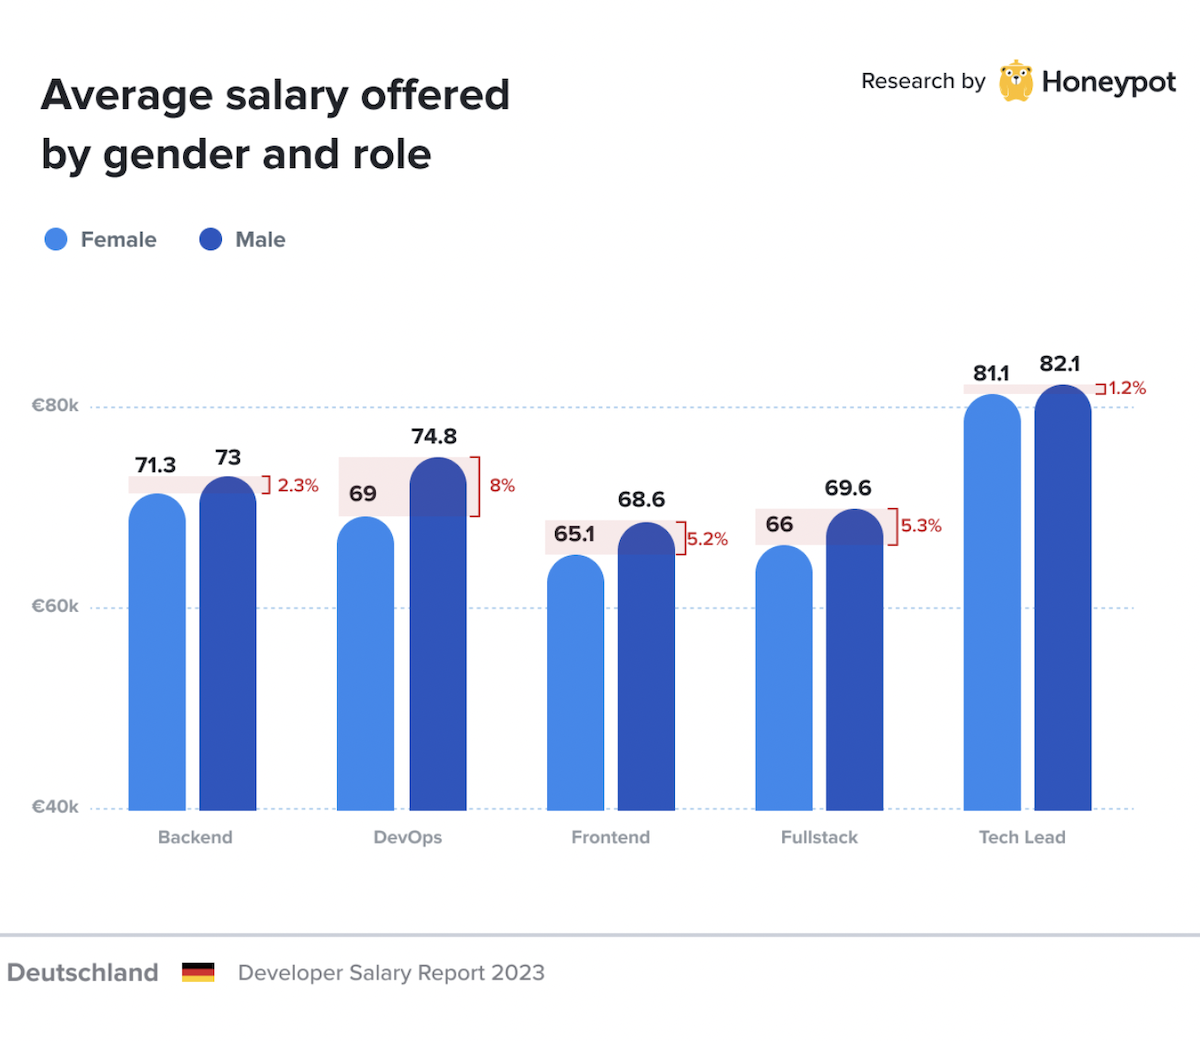 Germany – Average salary offered by gender and role